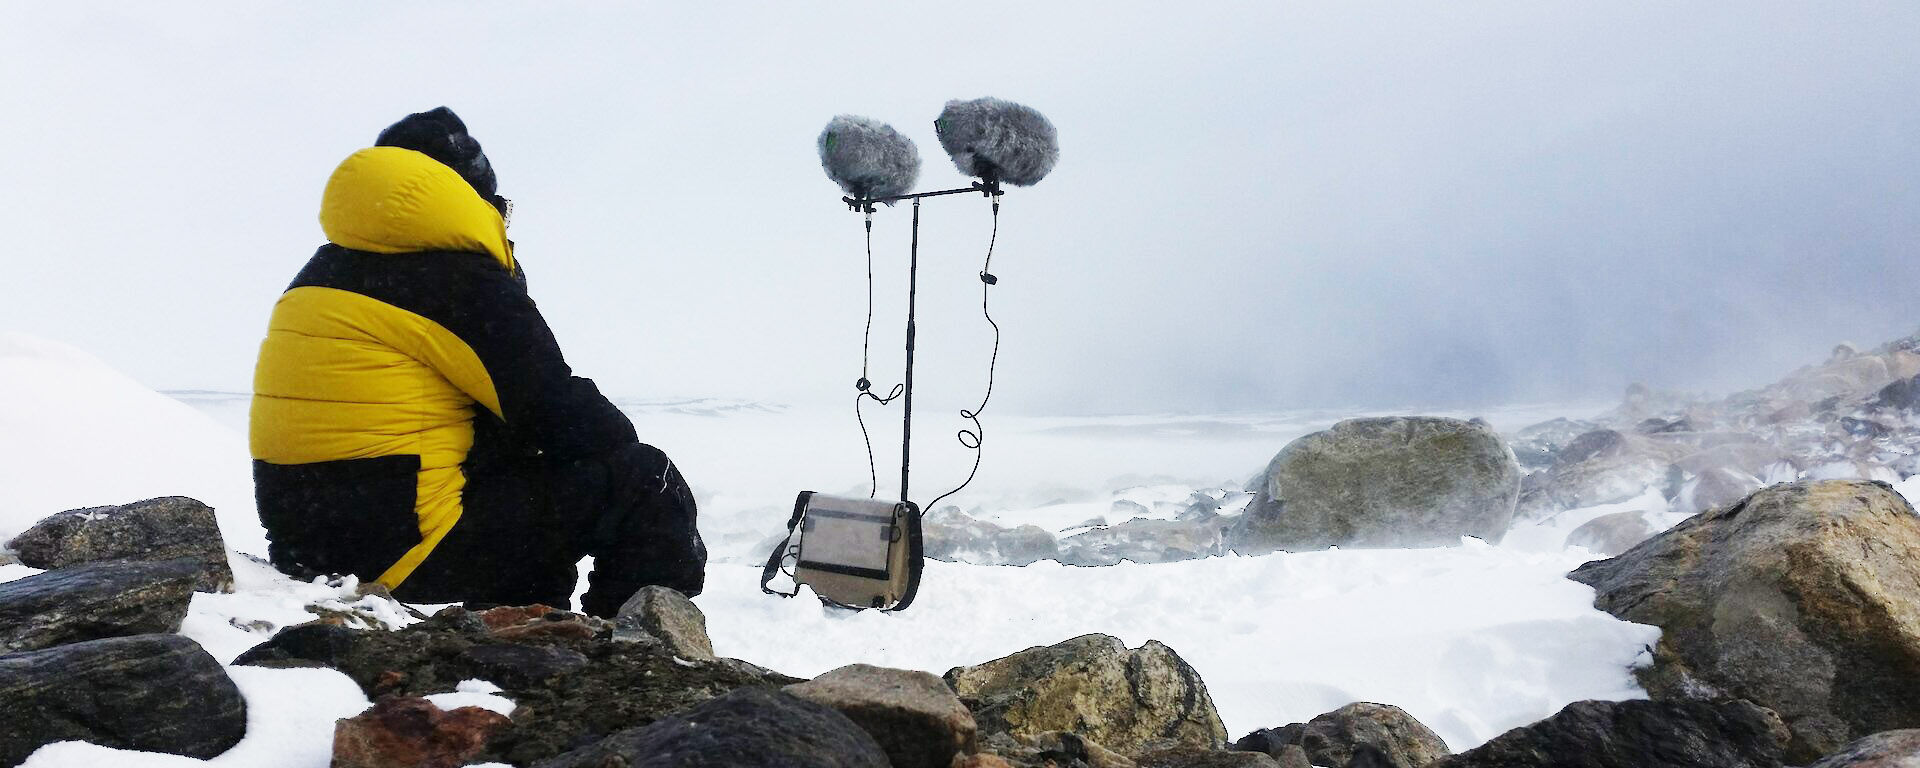 Sound artist recording the howl of the blizzard